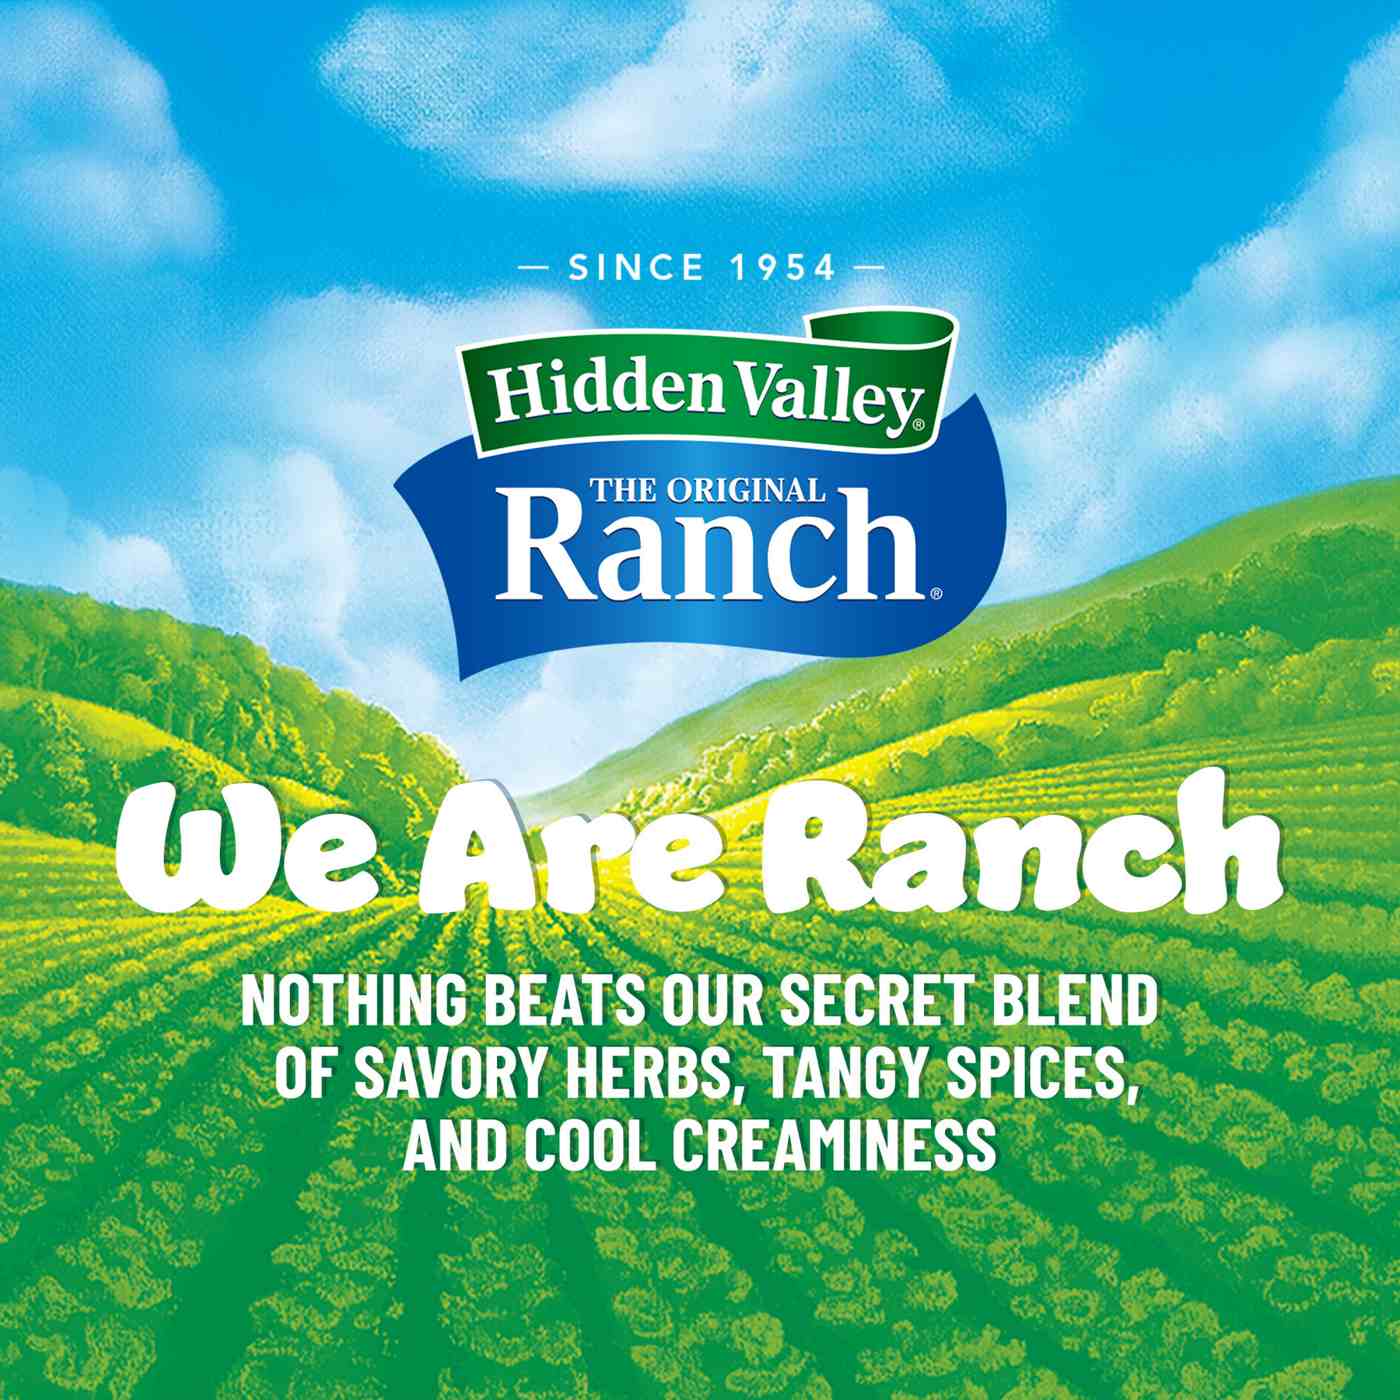 Hidden Valley Thick & Creamy Ready-to-Eat Classic Ranch Dip; image 8 of 8